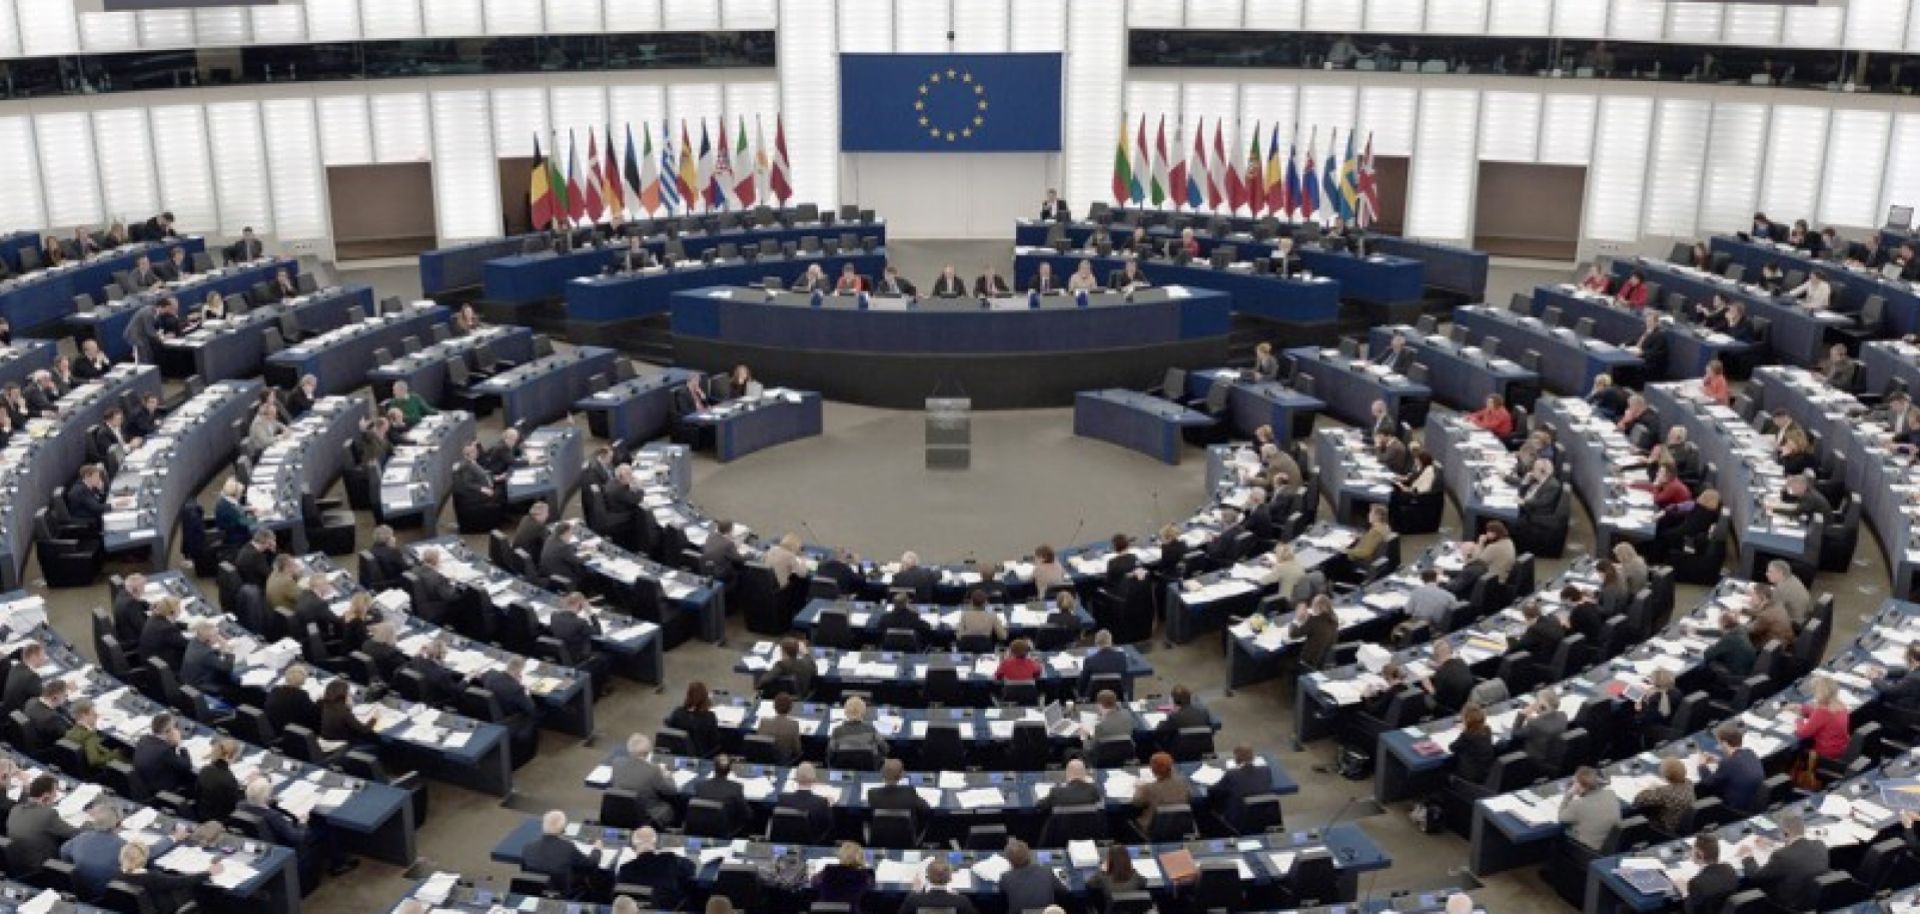 The inner workings of the European Parliament are a mystery to most of the 500 million people it governs